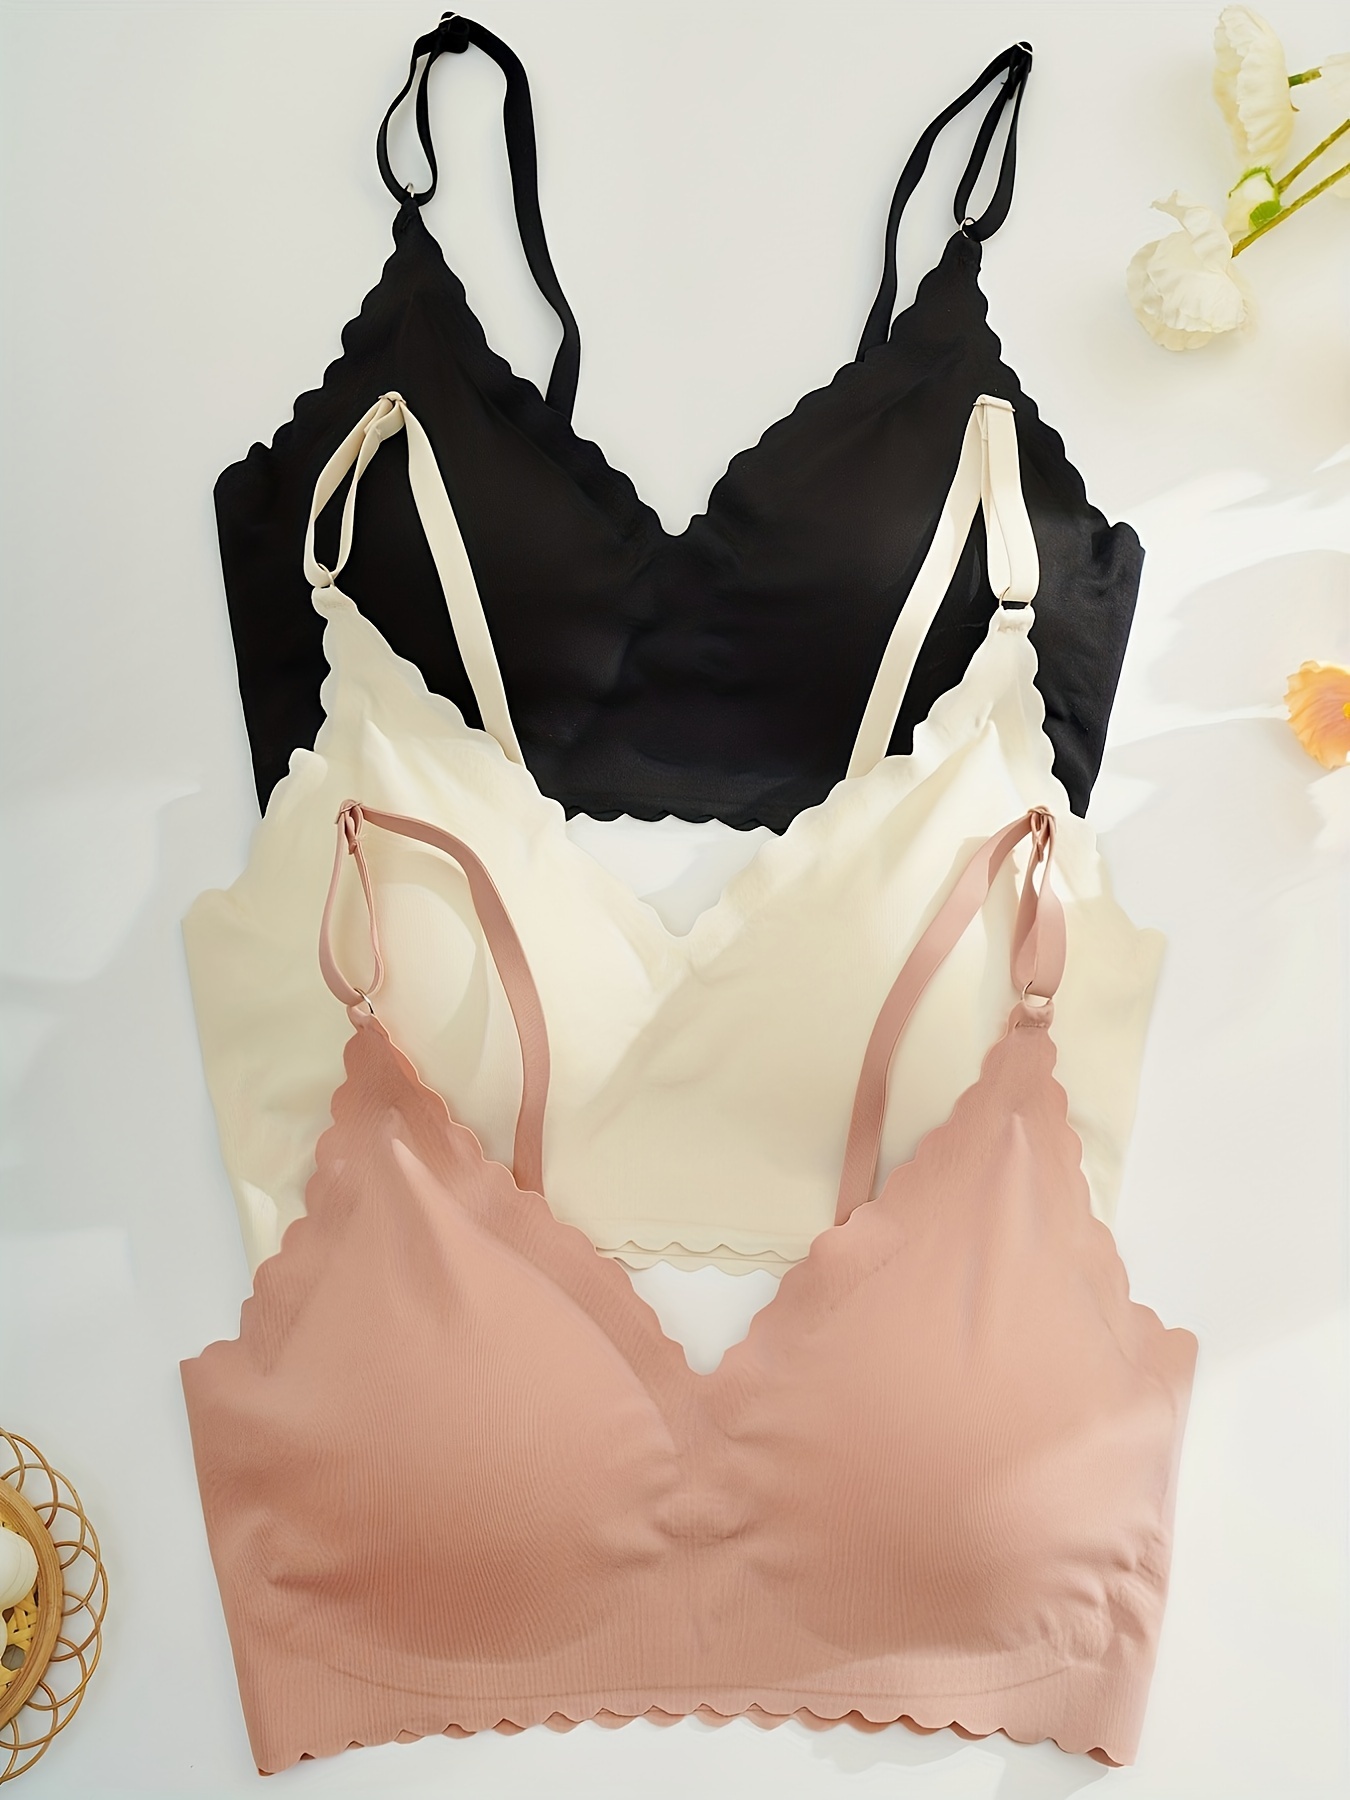 Bra size 38dd-free shipping all over the world on Aliexpress